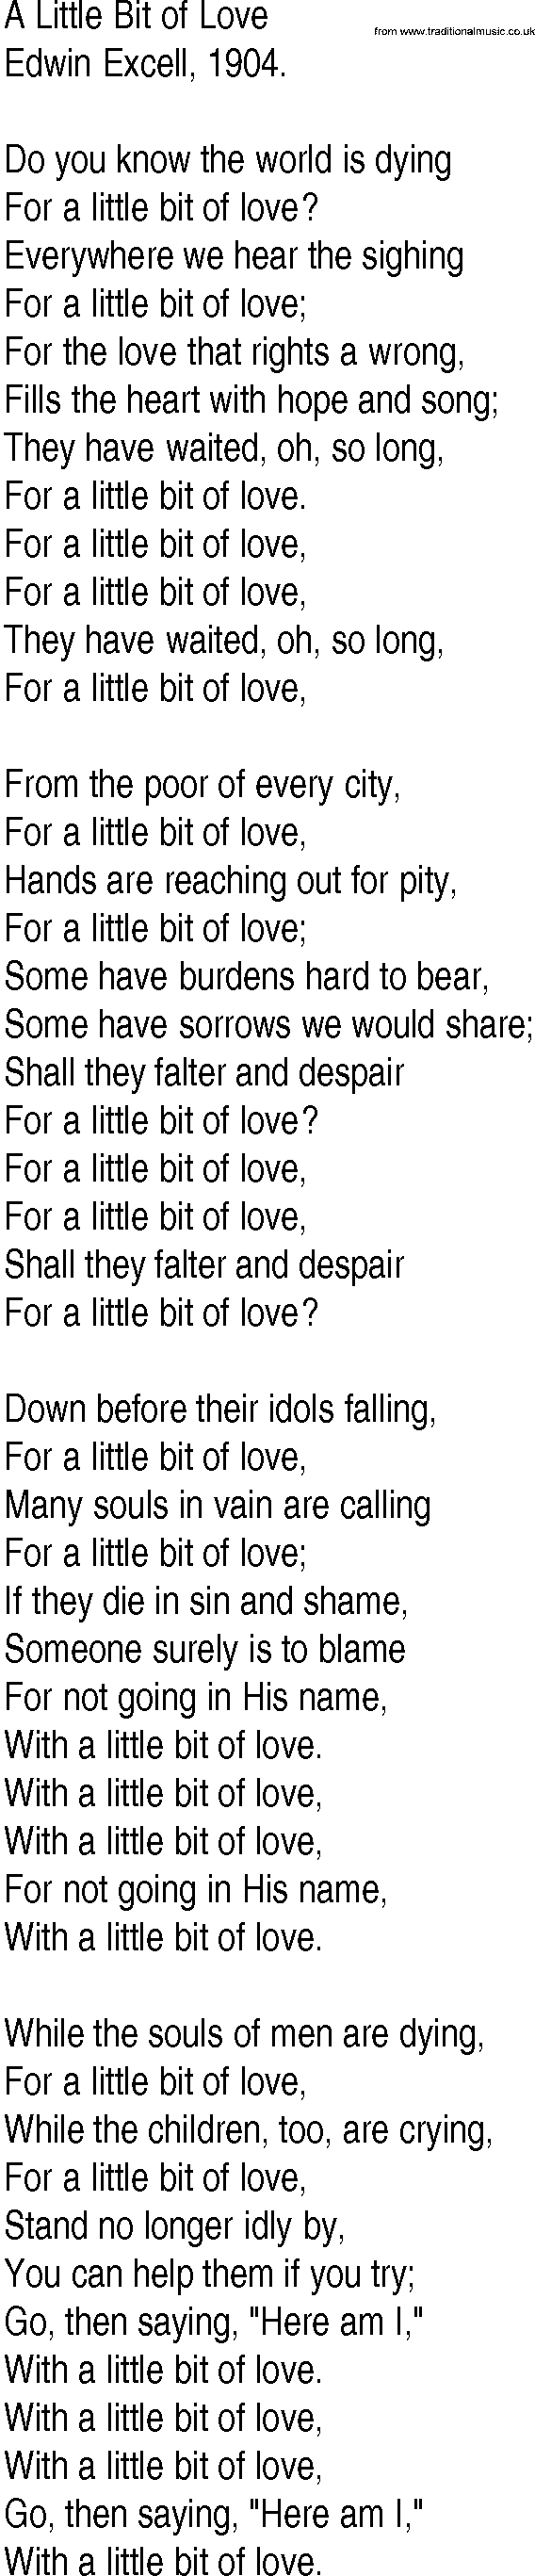 Hymn and Gospel Song: A Little Bit of Love by Edwin Excell lyrics